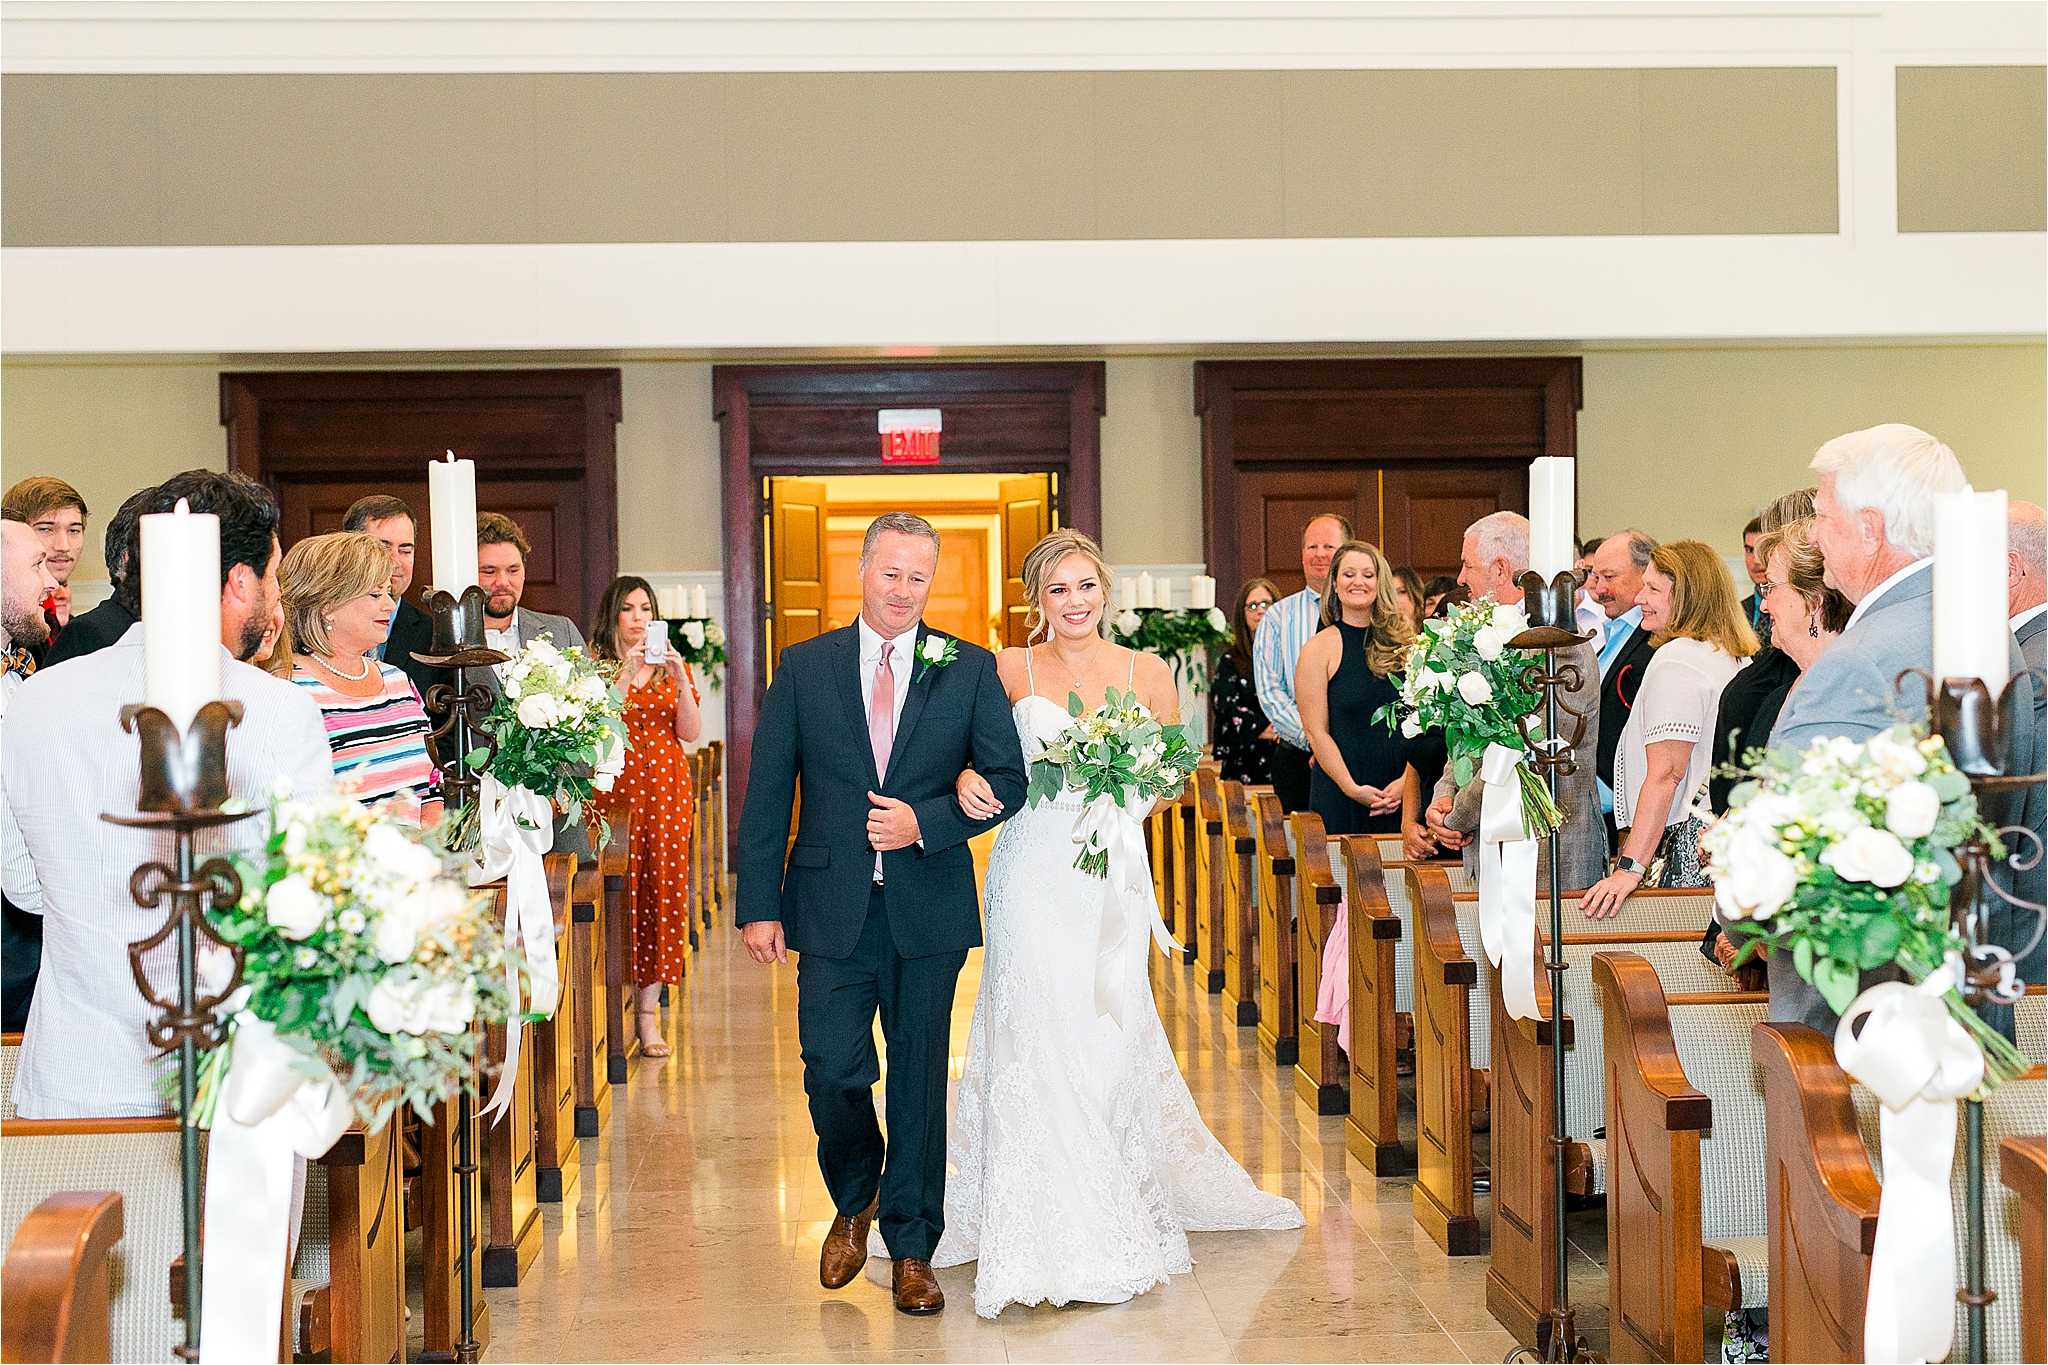 A bride and her dad happily walk down the aisle for her wedding ceremony at Prestonwood Chapel in Plano, Texas 